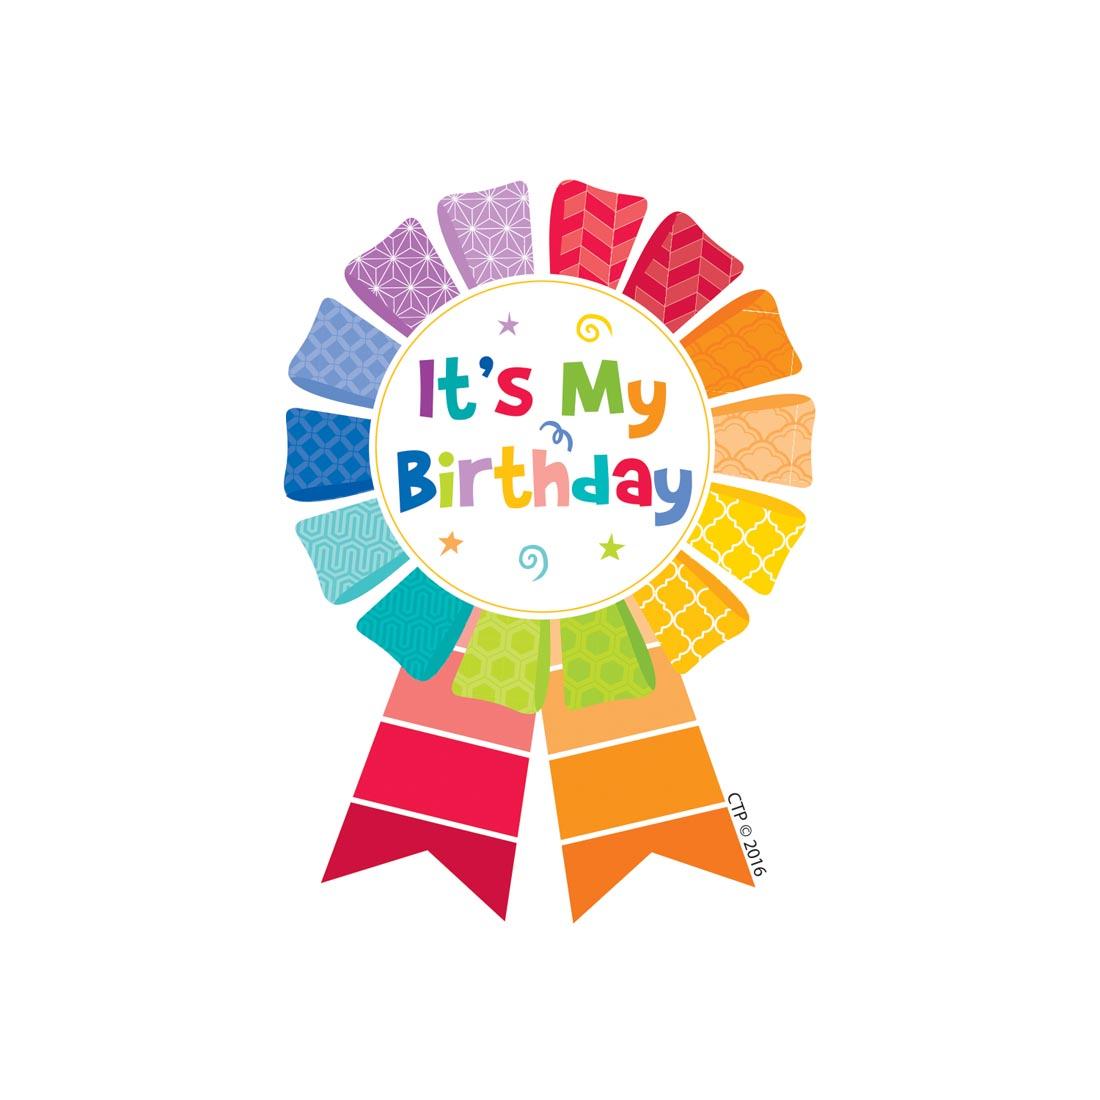 It's My Birthday Badge from the Painted Palette collection by Creative Teaching Press